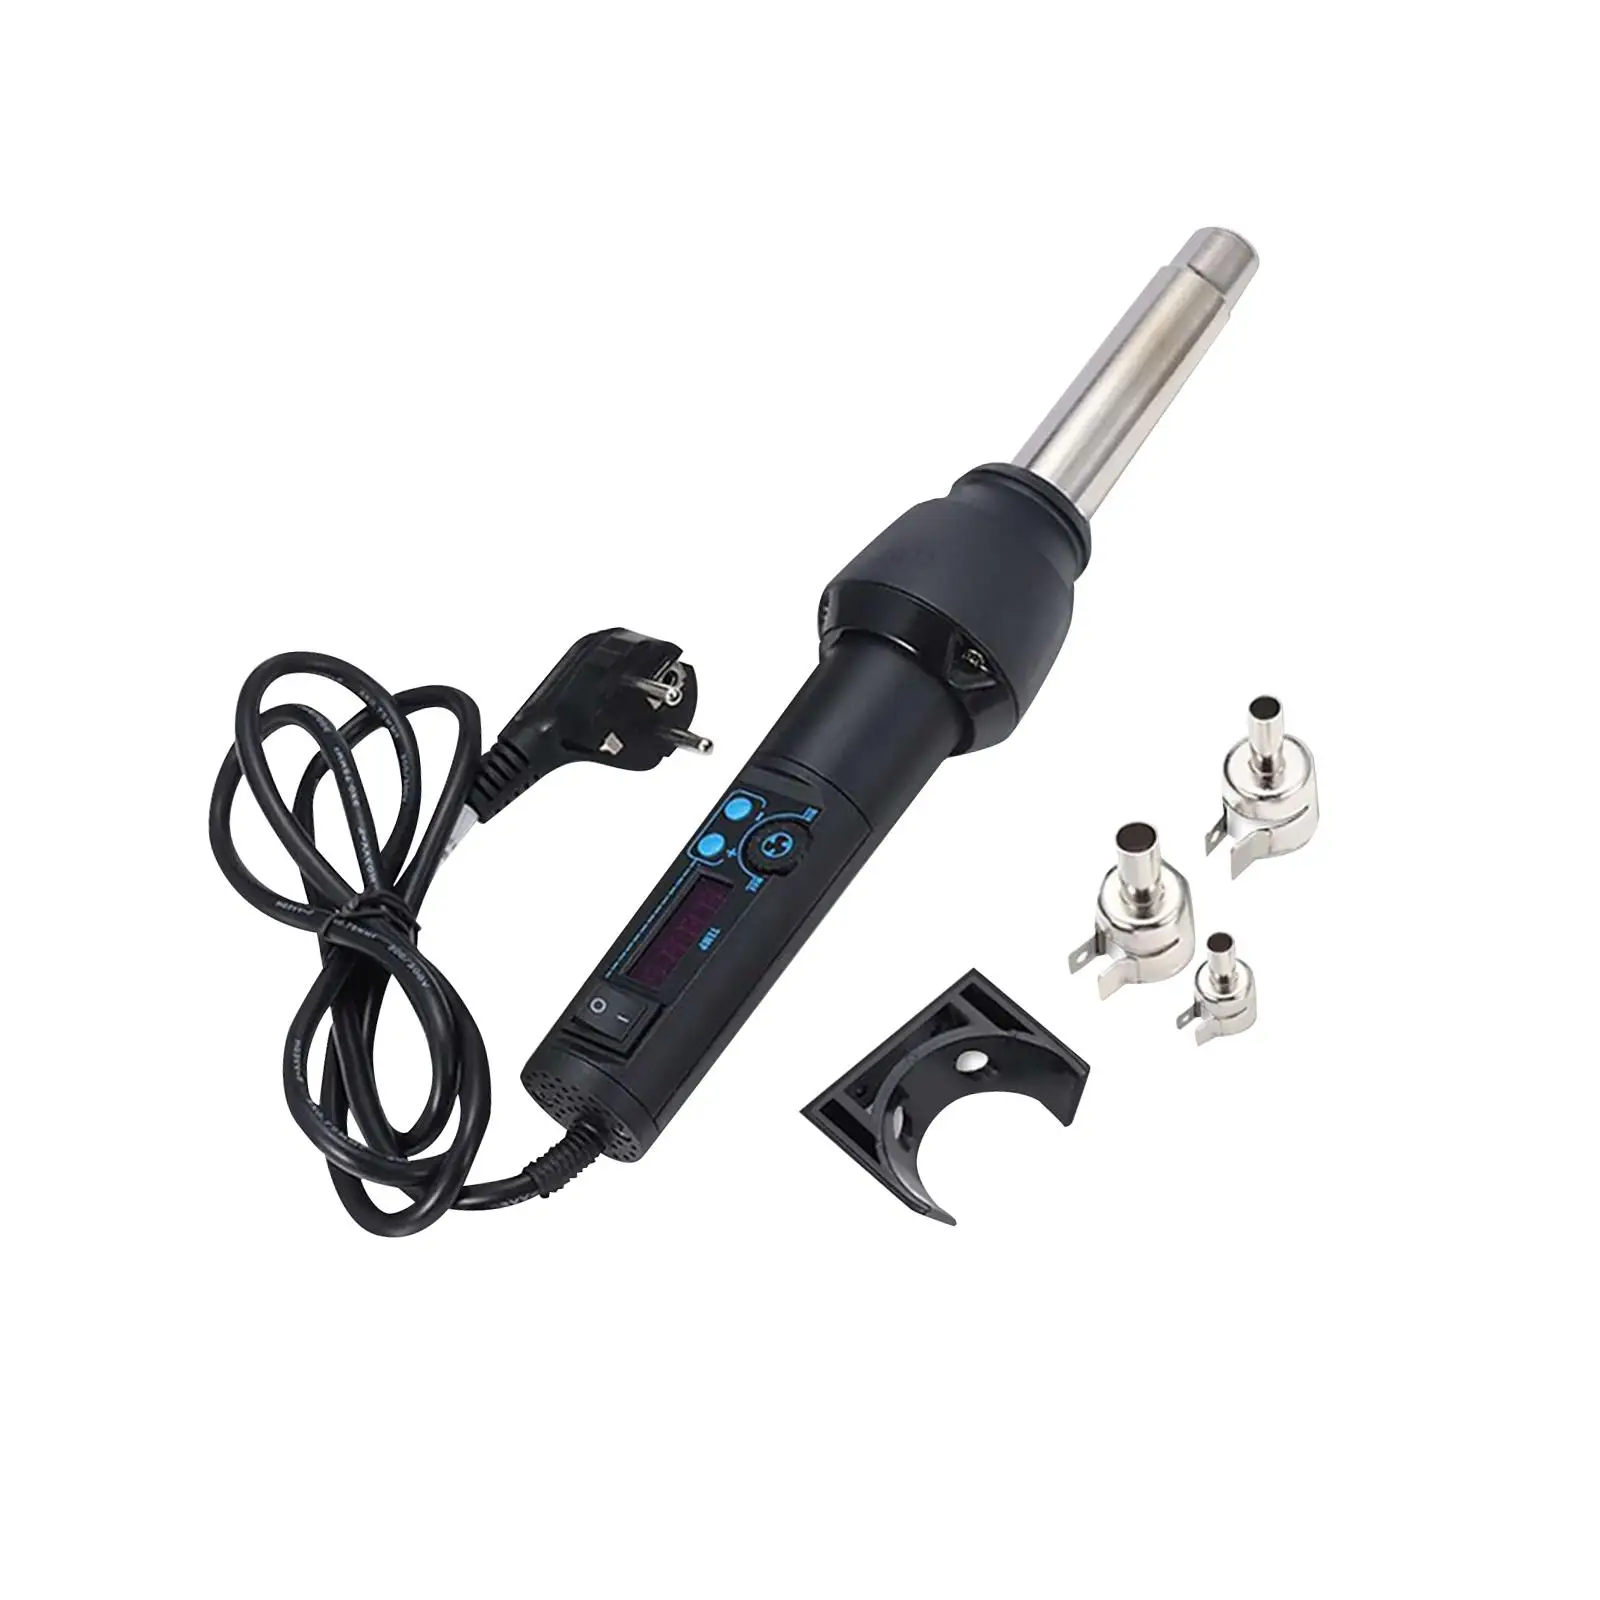 220V Hot Air Pen with LCD Display Fast Heating Temperature Adjustable with Nozzle Electric Handheld Mini Heat Tool for